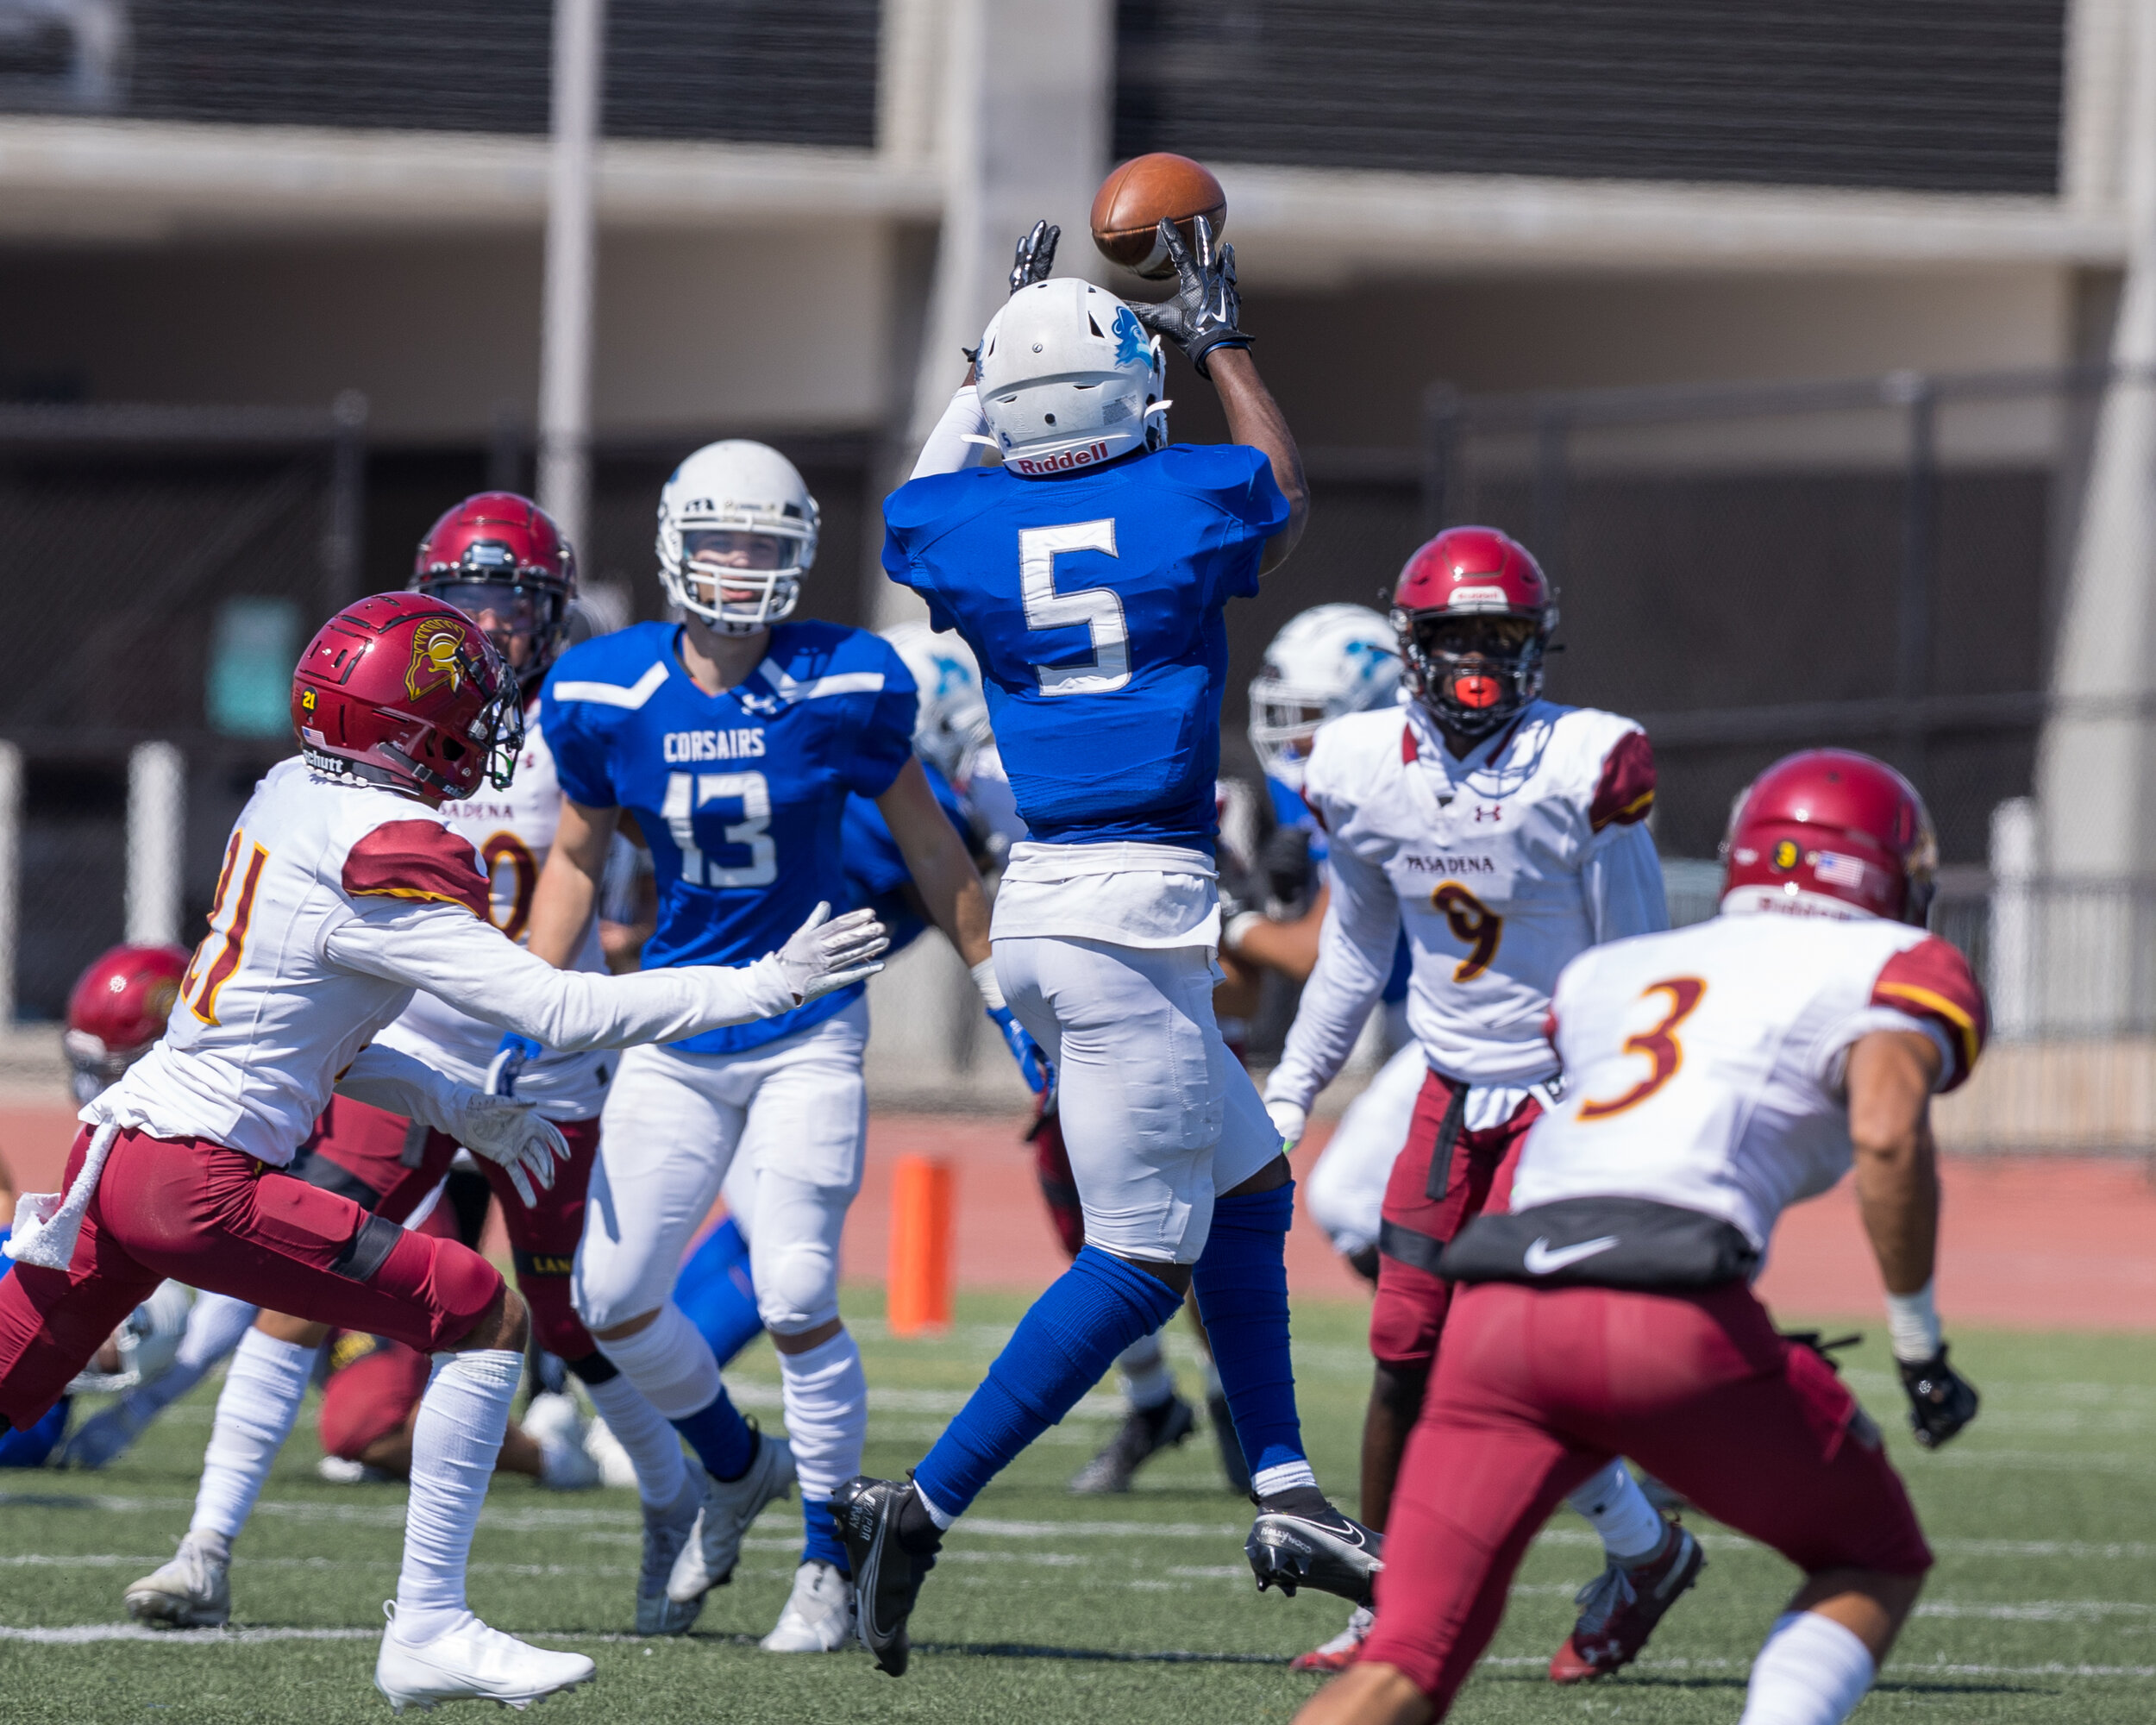  SMC Sophmore WR Tariq Brown (5) catches a pass. Brown led the team with 8 catches for 142 yards, including an 80 yard touchdown reception. (Maxim Elramsisy | The Corsair) 